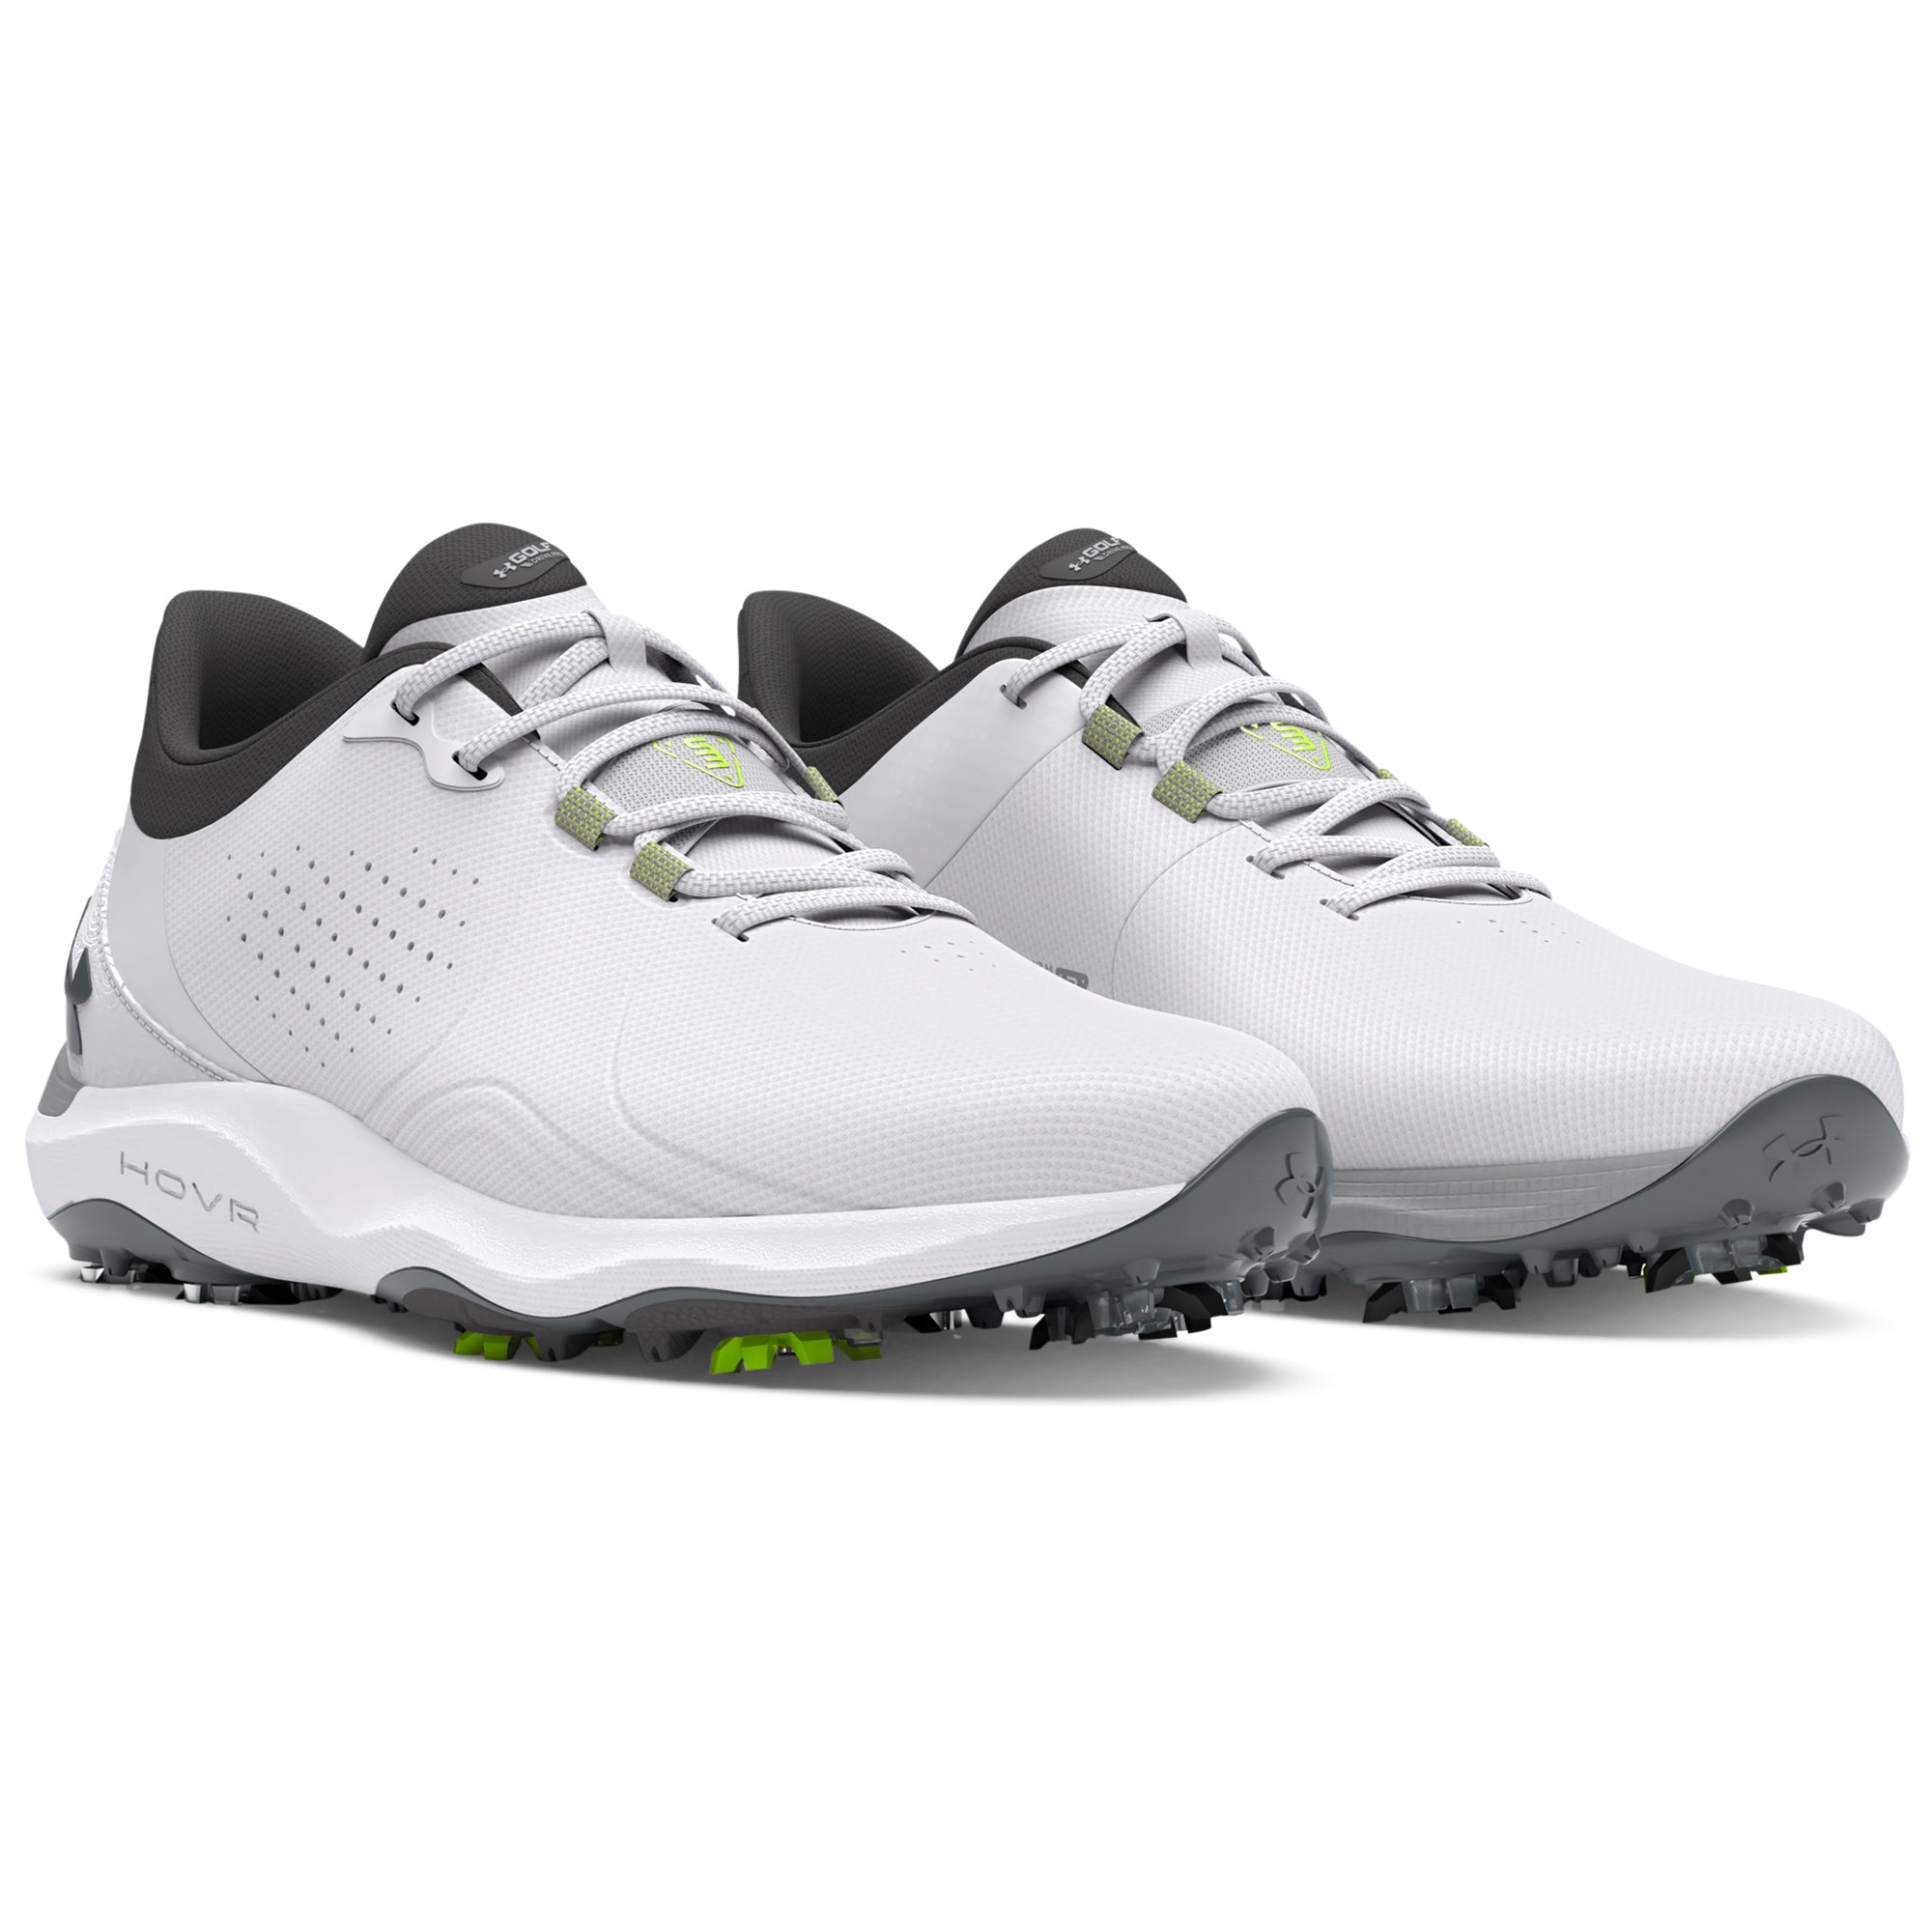 Under Armour Drive Pro Wide Golf Shoes 3026919 White Gunmetal 100 ...